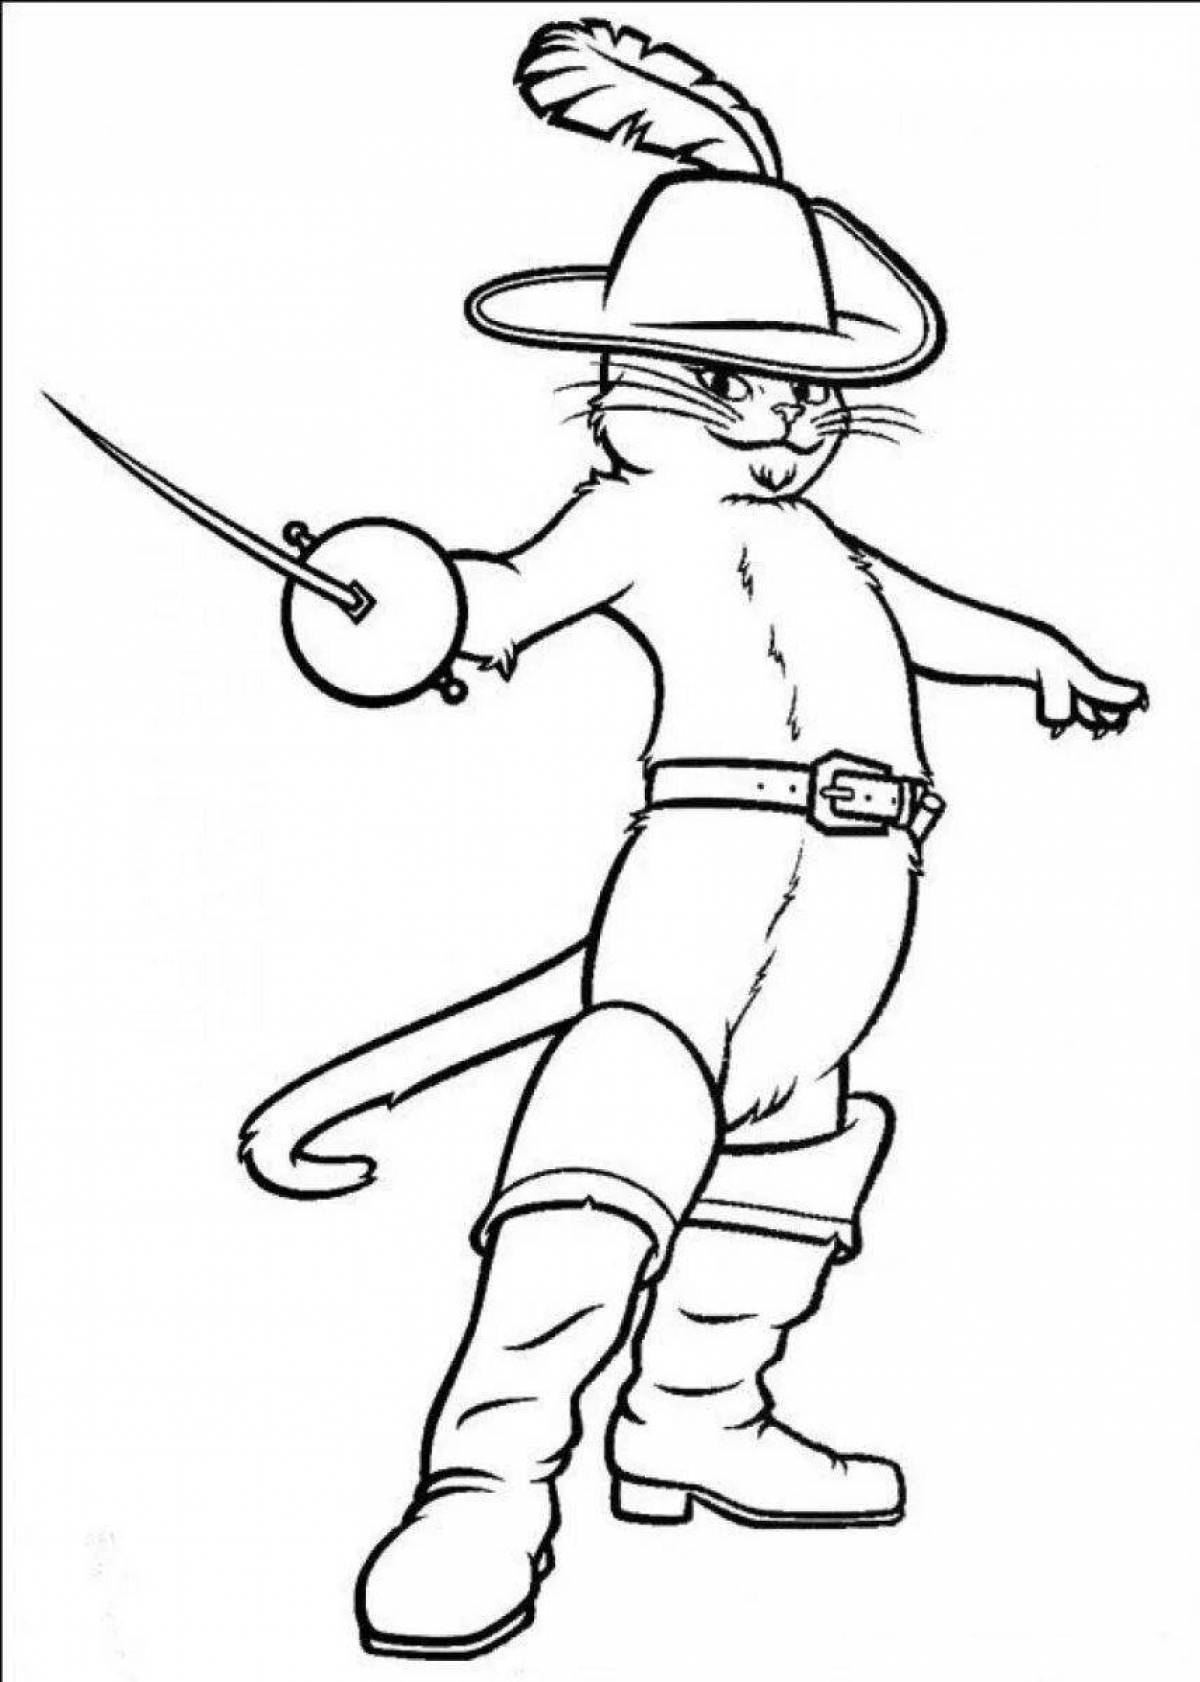 Glittering Puss in Boots coloring page